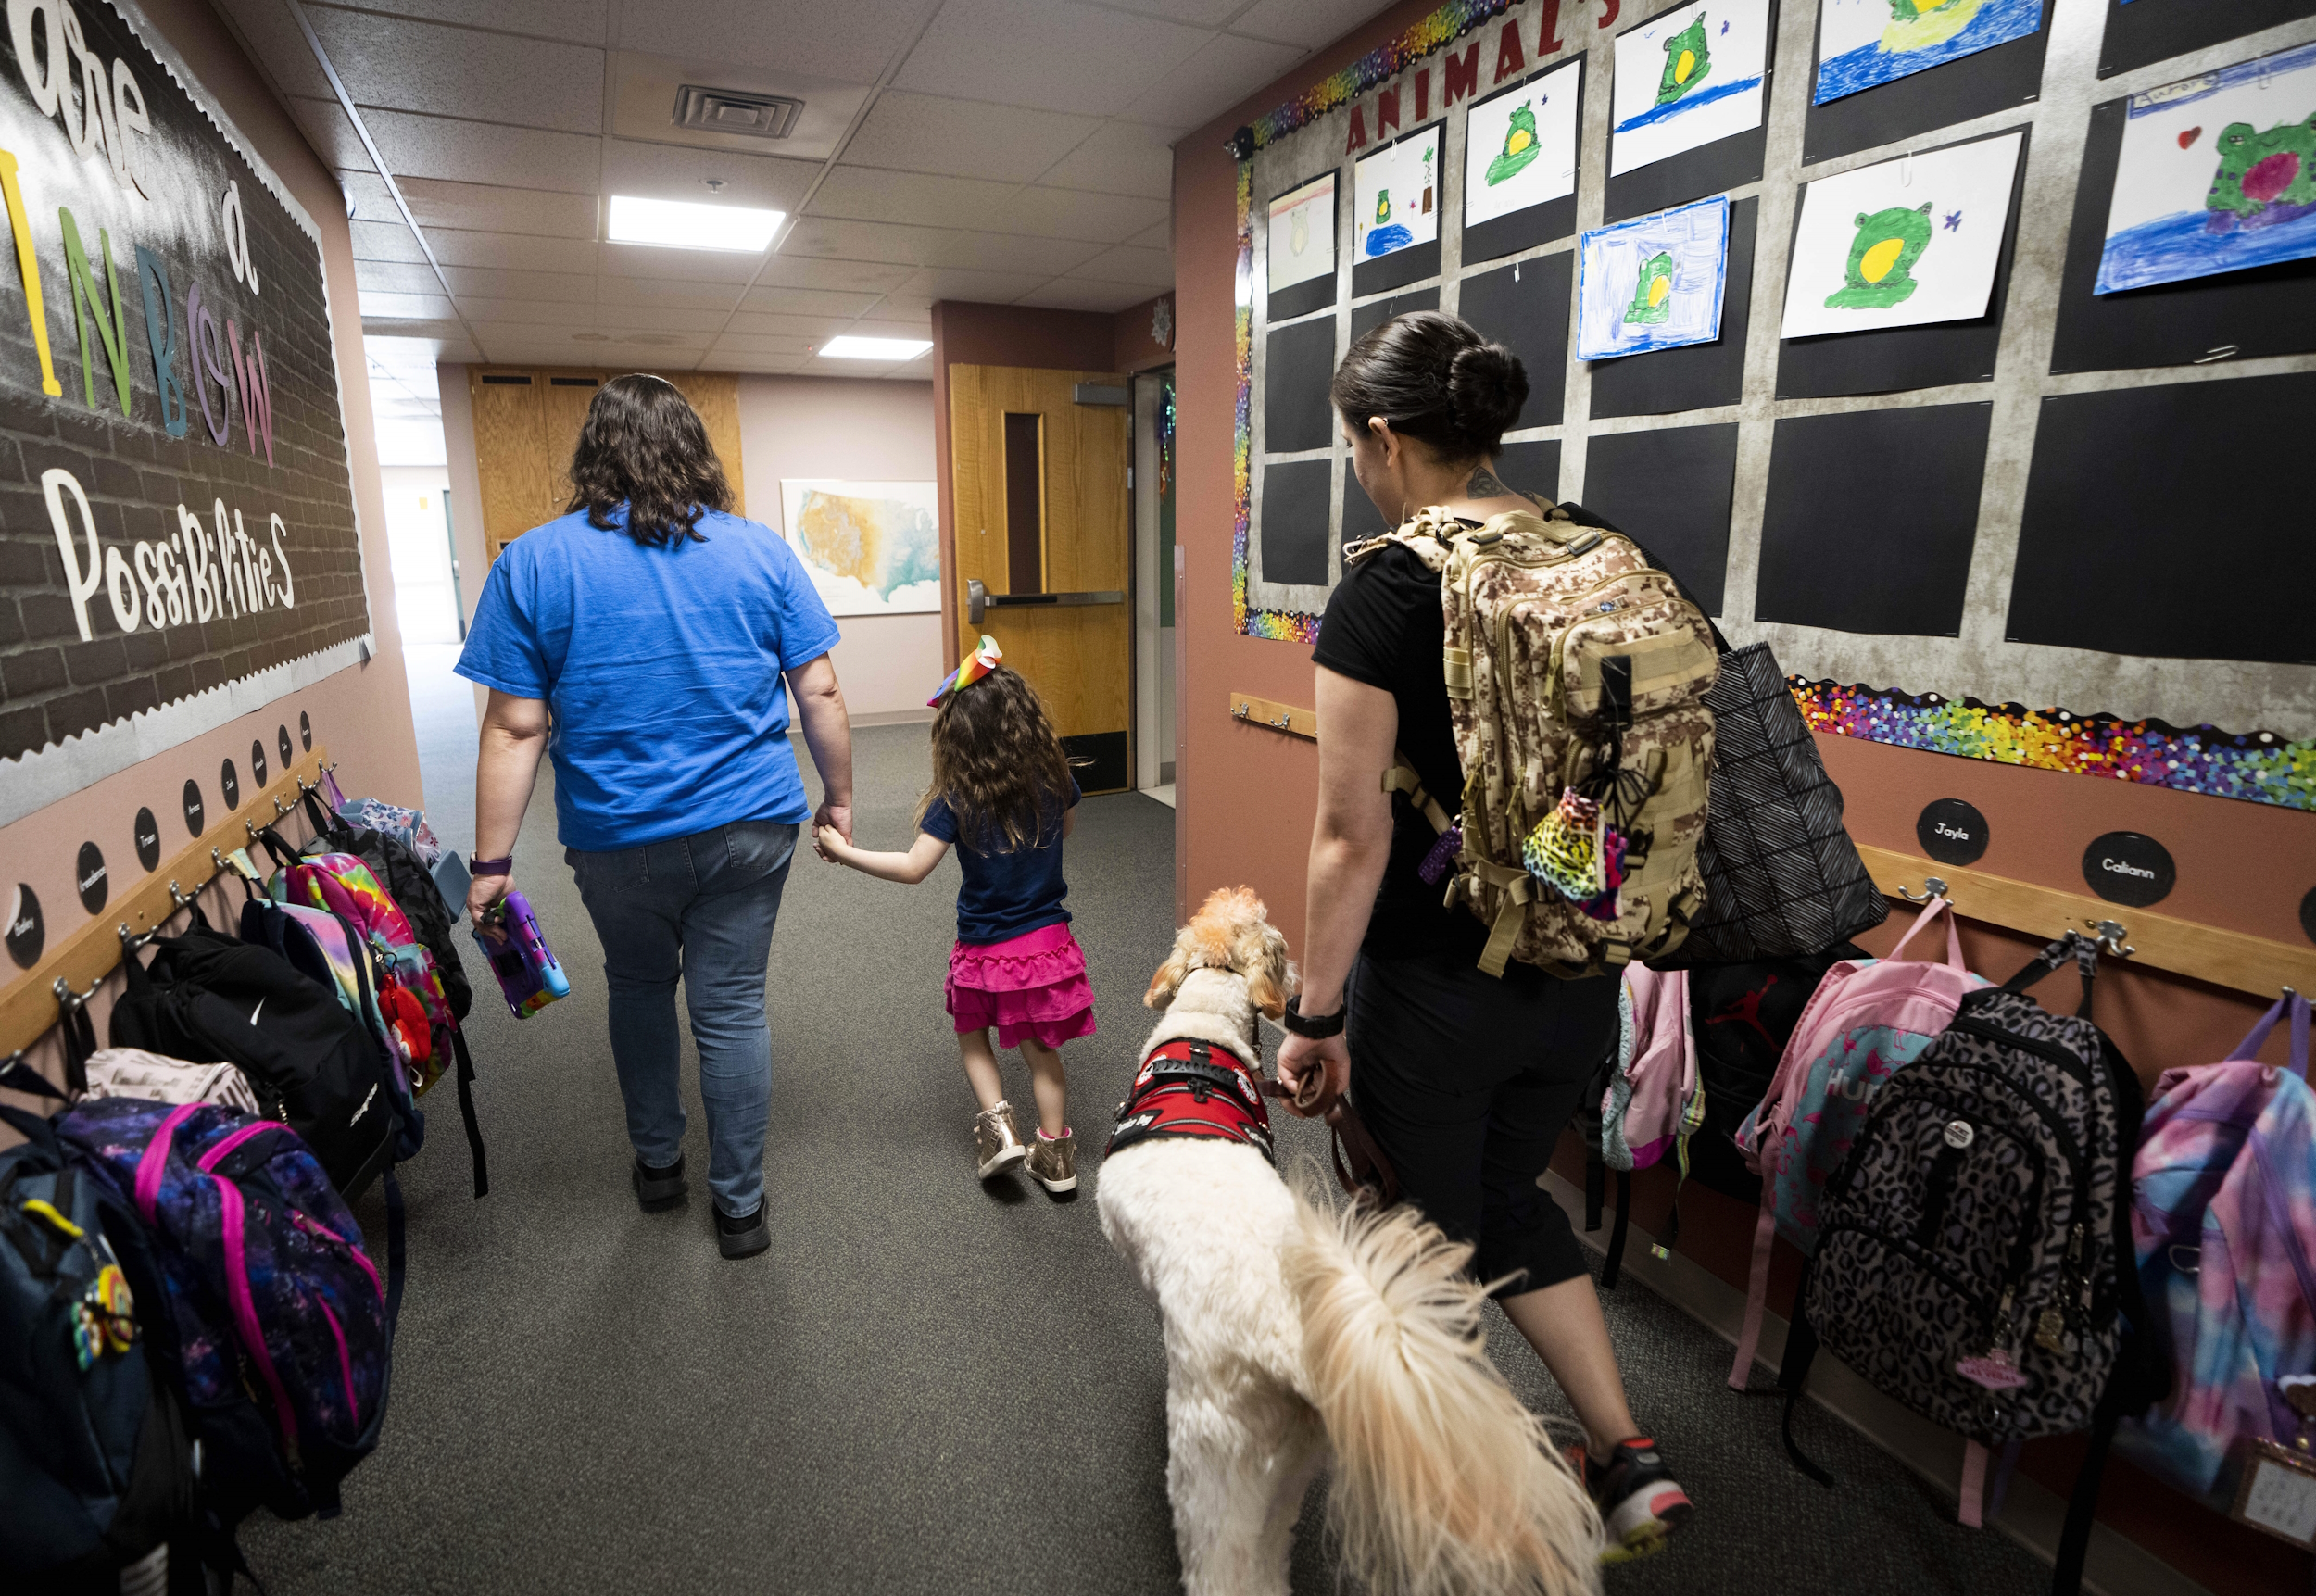 Disabled students' shorter school days: Woman in blue t-shirt and blue jeans holds hand of young girl wit dark hair in black top and pink skirt walking away from camera in school hallway followed by dark-haired woman with daypack leading large golden-coated dog on leash with red service dog vest..